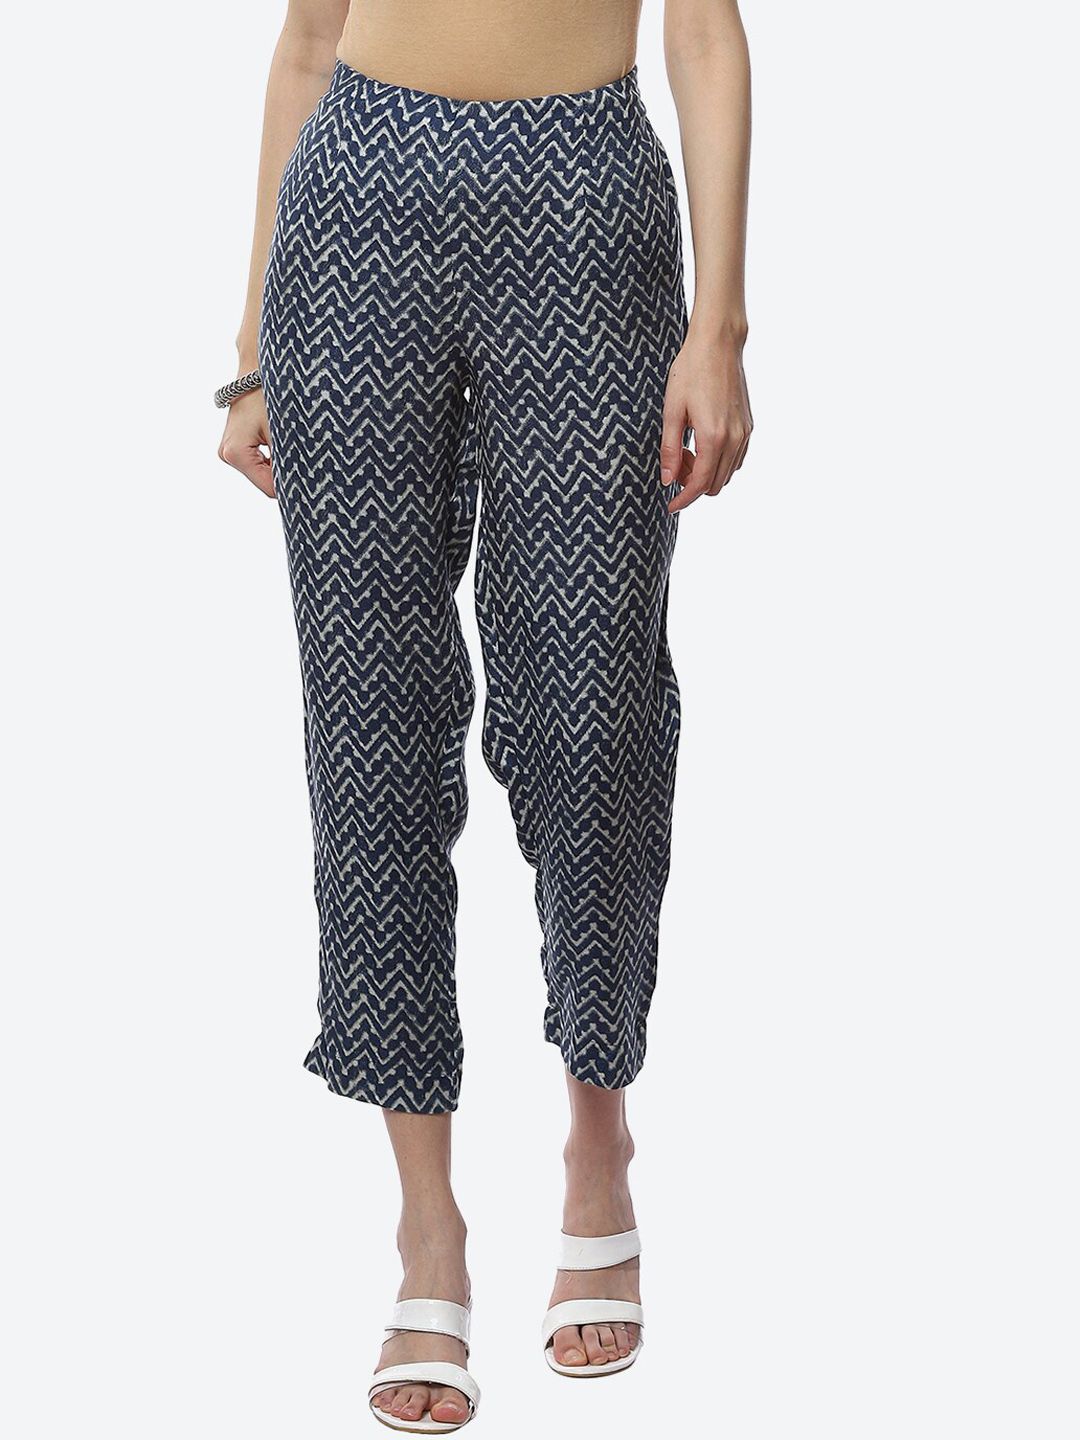 Biba Women Blue Printed Relaxed Trousers Price in India